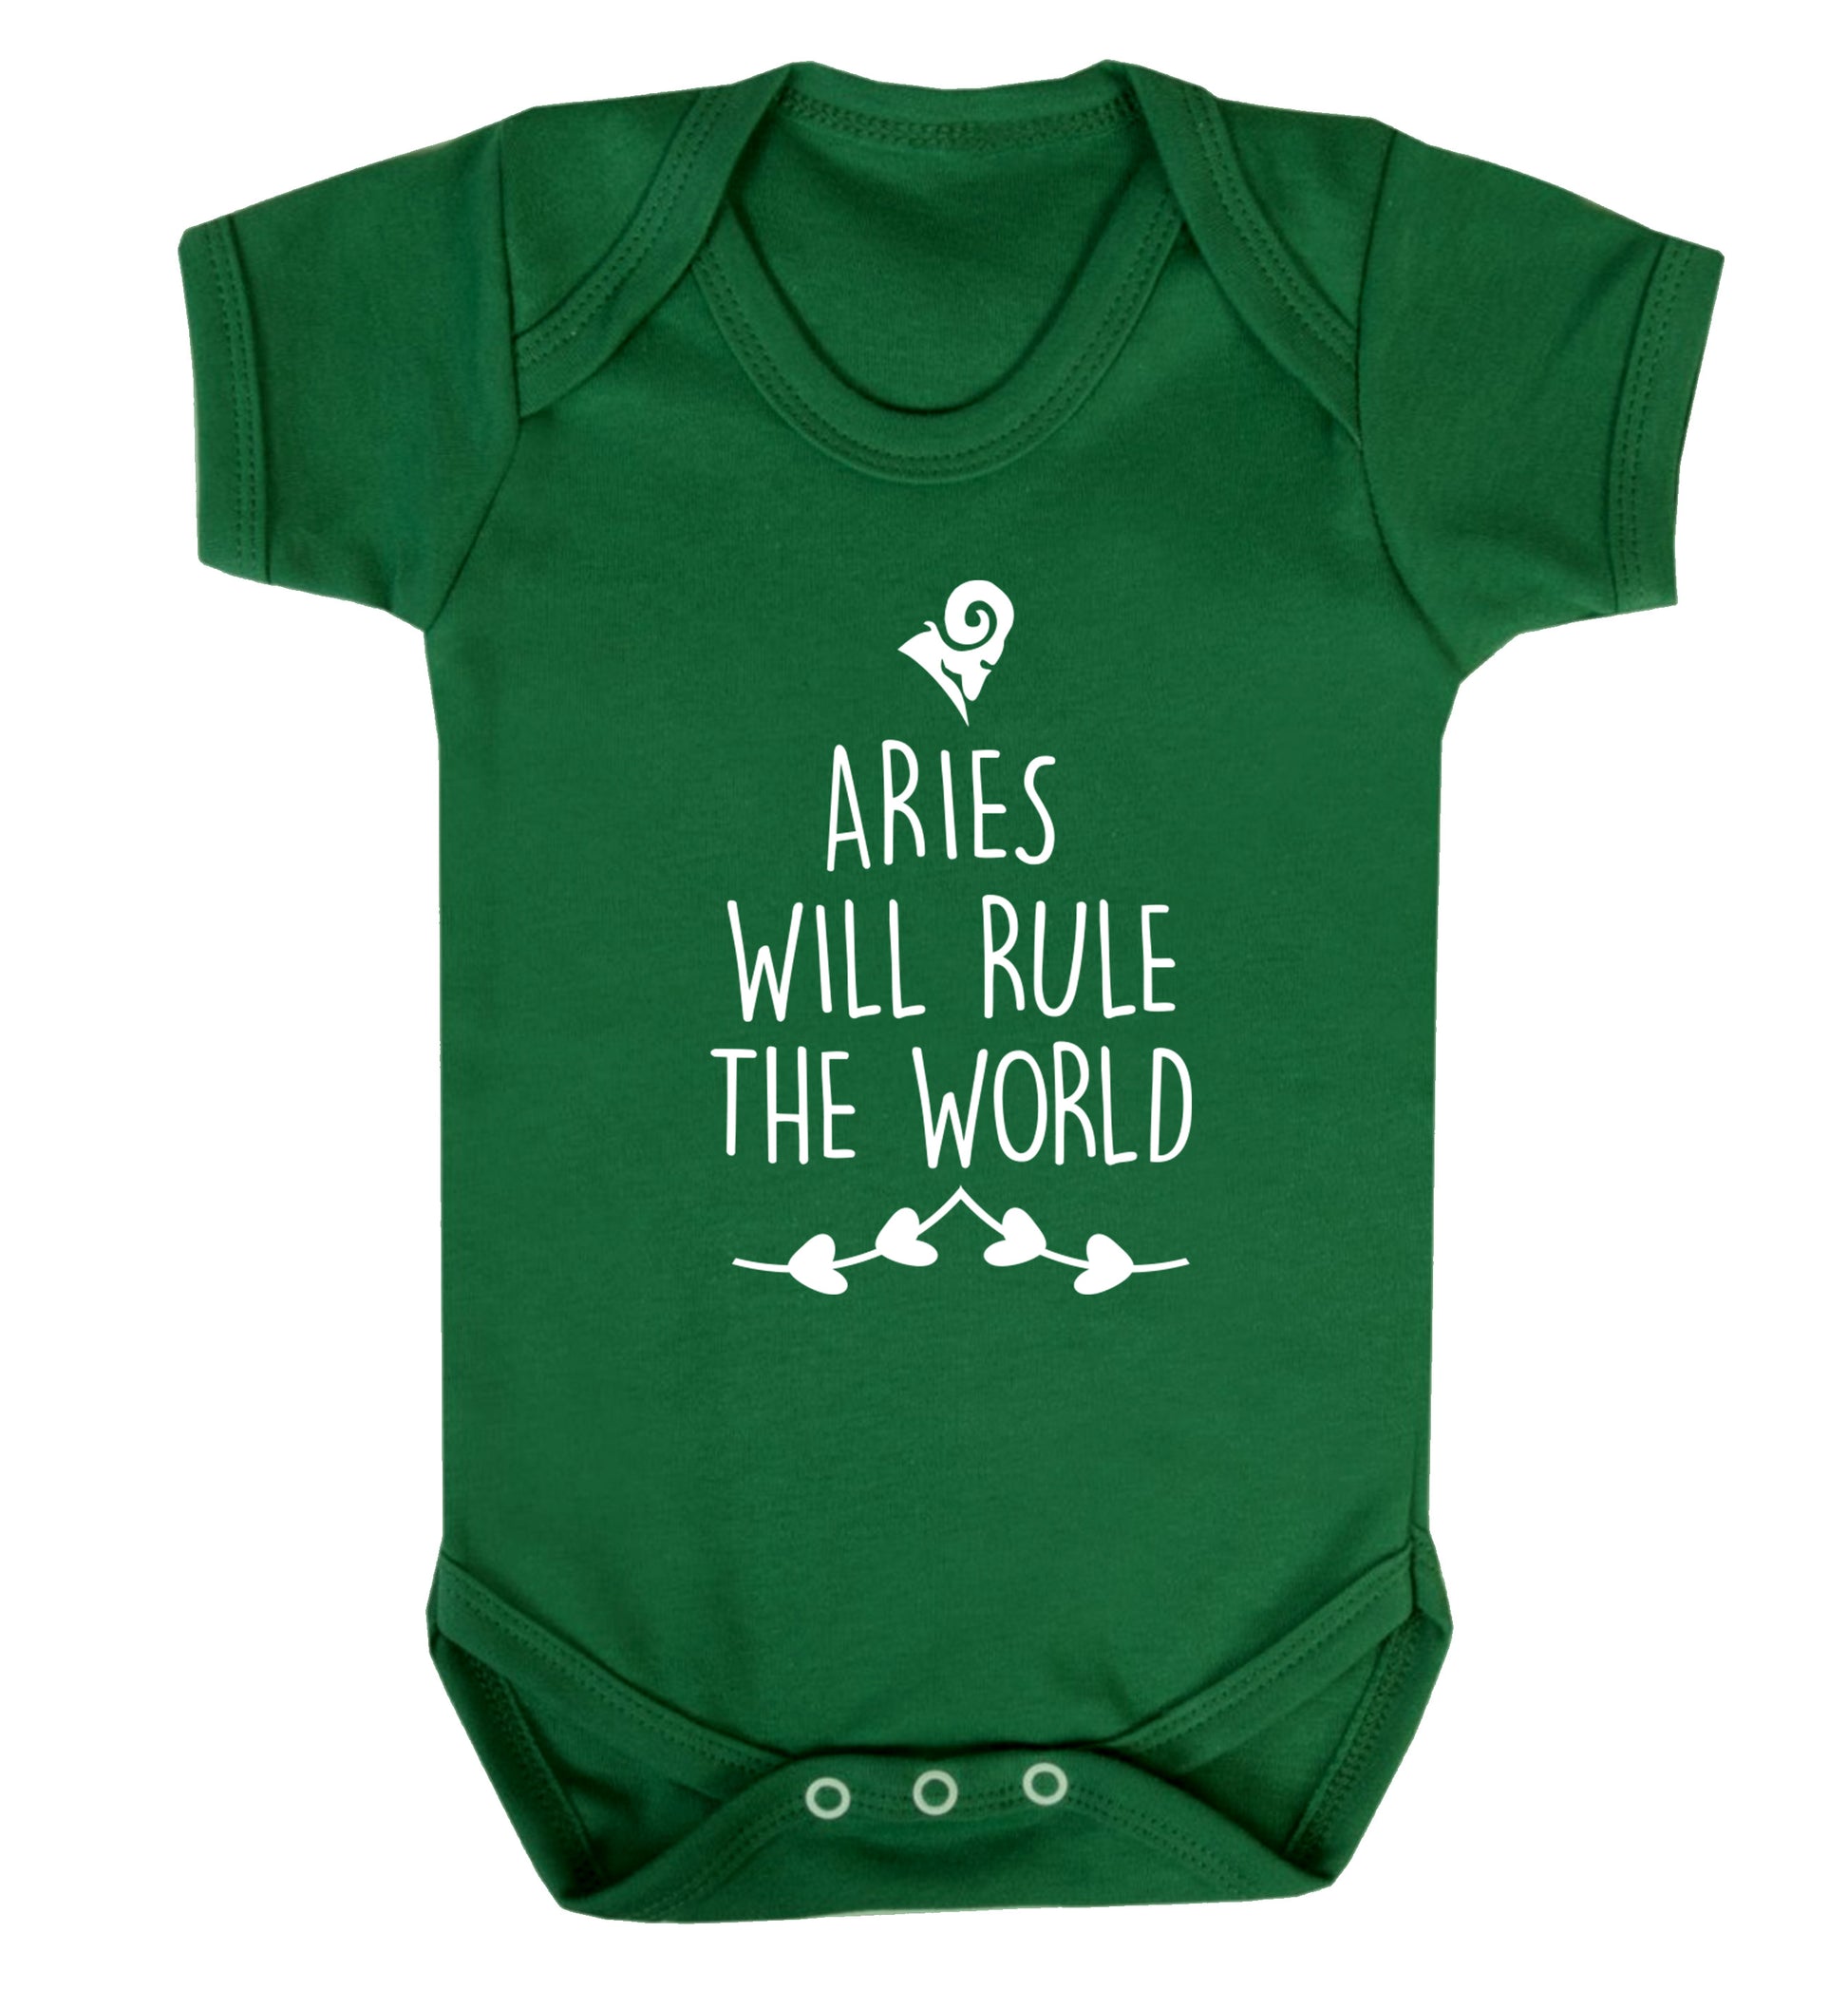 Aries will rule the world Baby Vest green 18-24 months